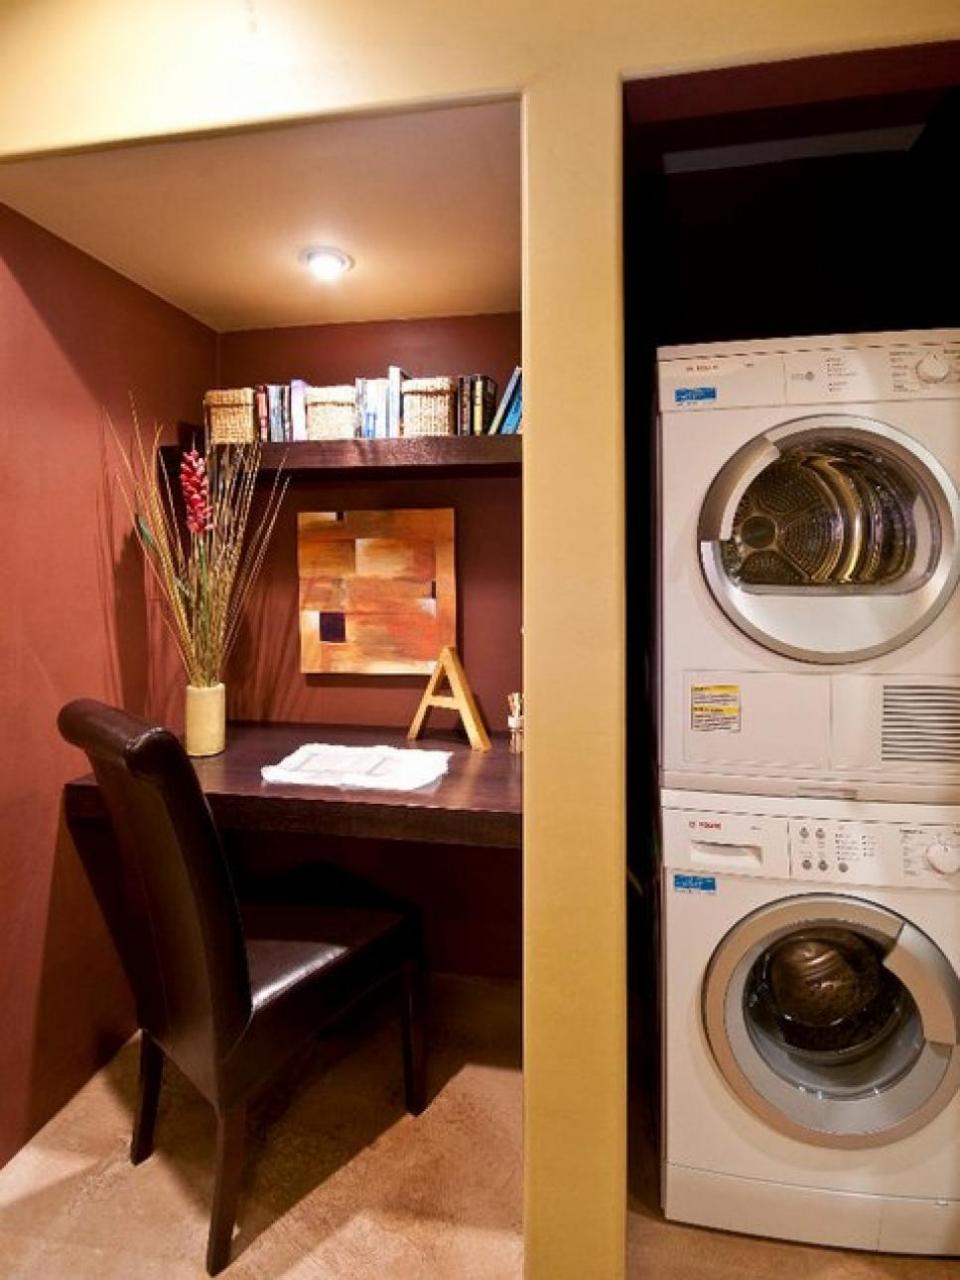 Decor and Storage Tips for Basement Laundry Rooms HGTV